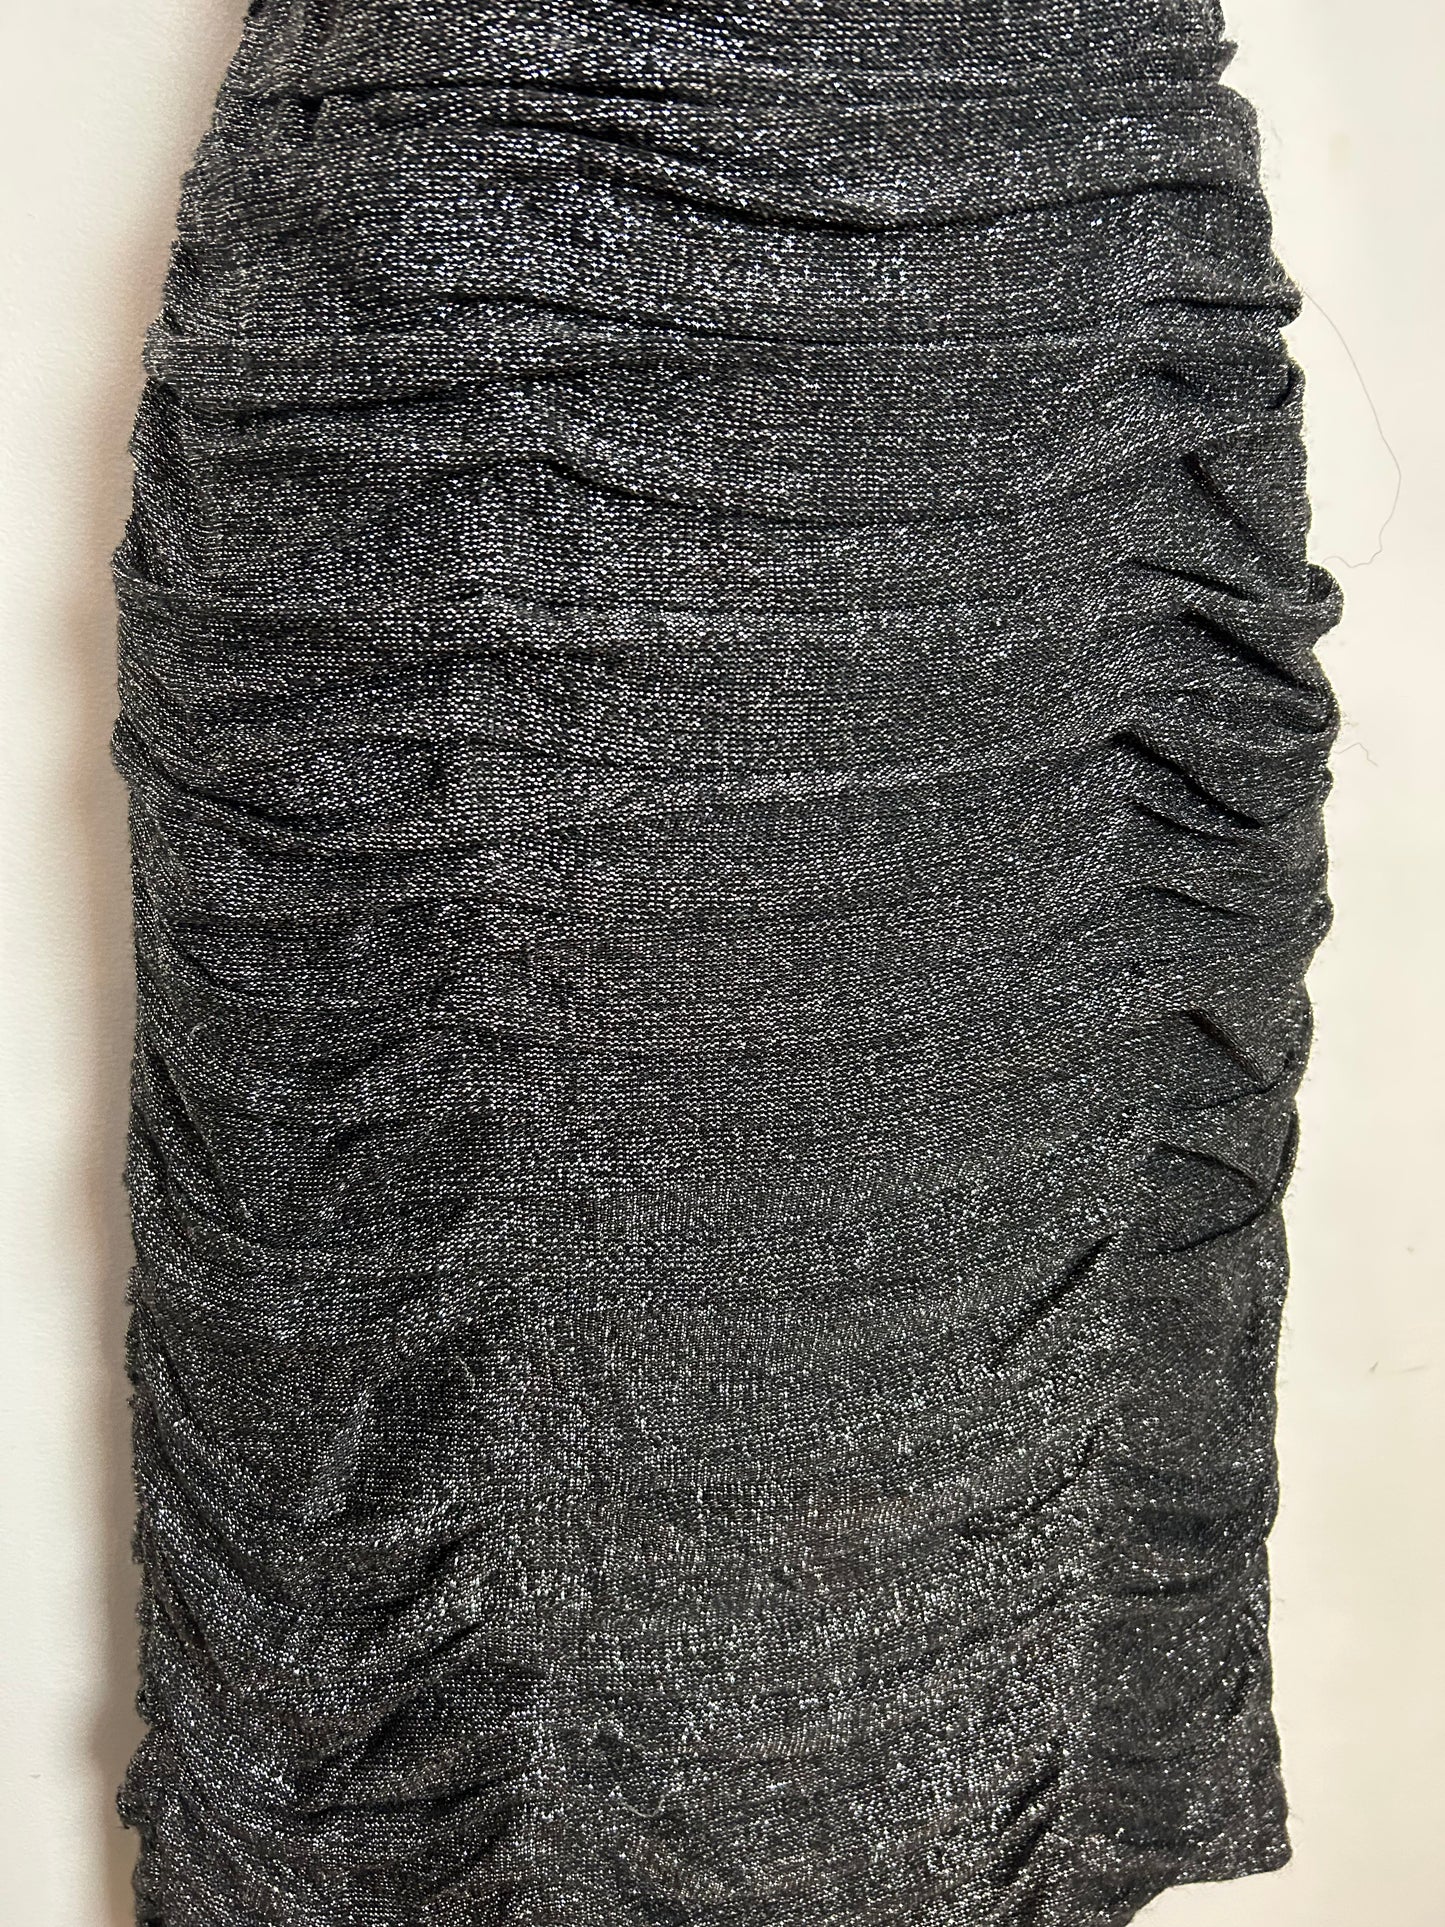 Vintage 1960s UK Size 8 Black & Silver Glittery Lurex Ruched Detail Party Evening Cocktail Dress